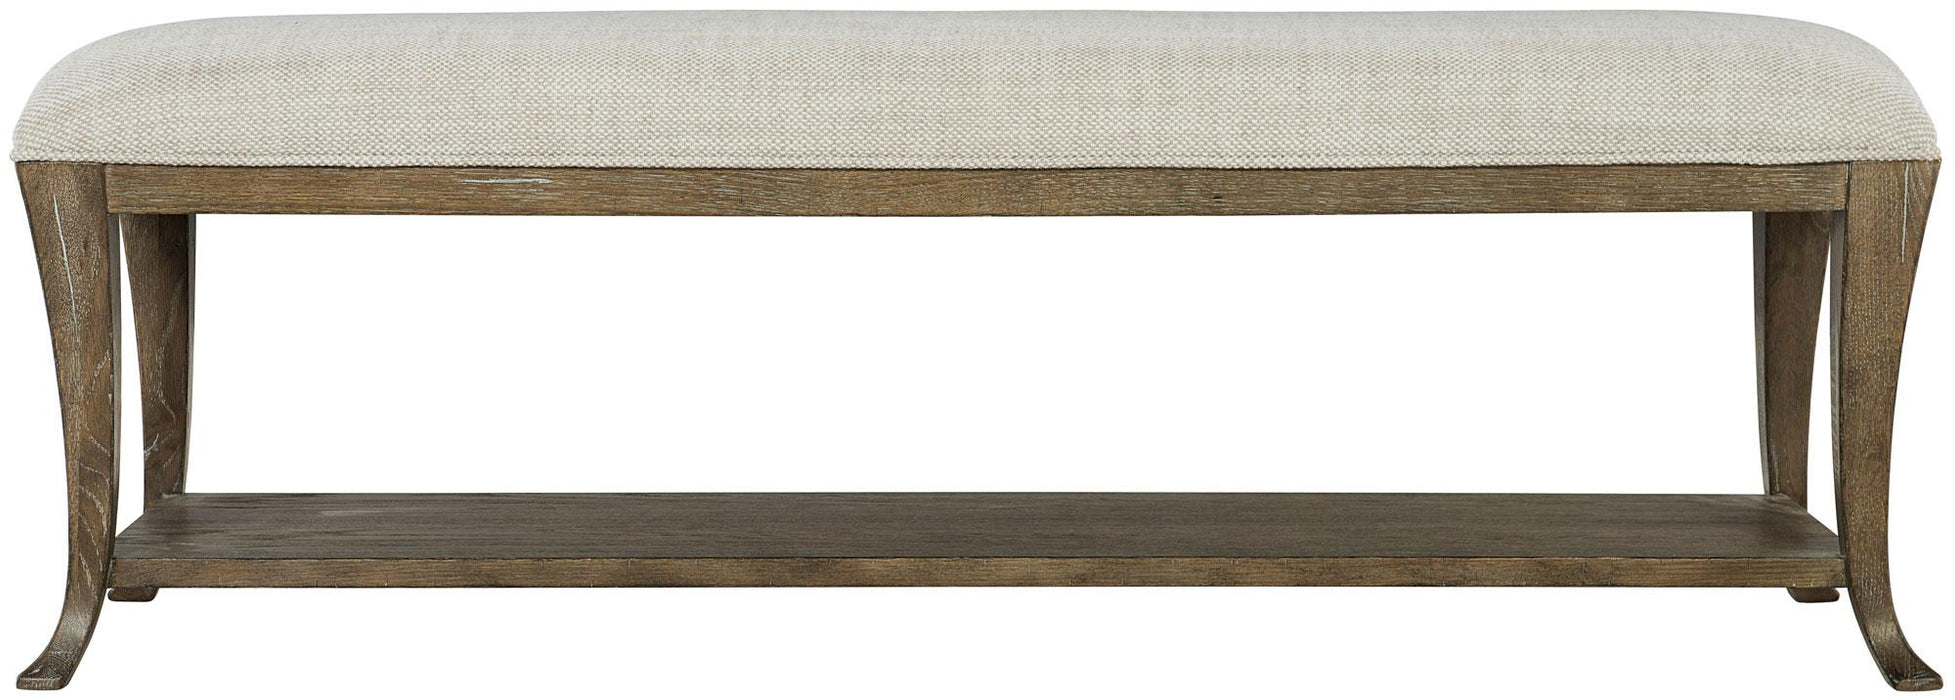 Bernhardt Rustic Patina Upholstered Bench in Peppercorn 387-509D image